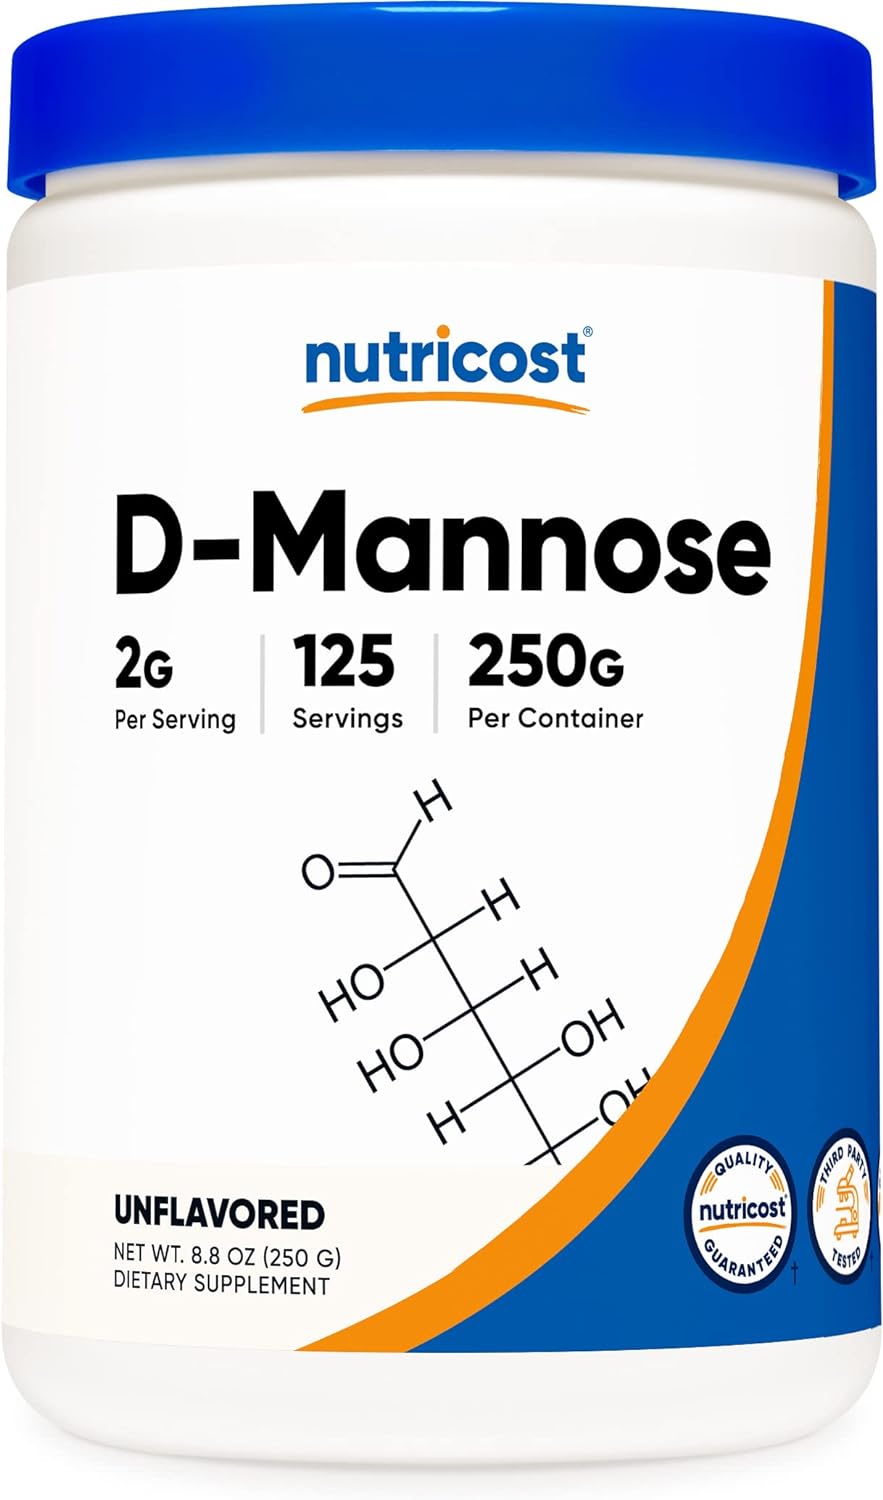 Nutricost D-Mannose Powder 250 Grams - Non-GMO and Gluten Free